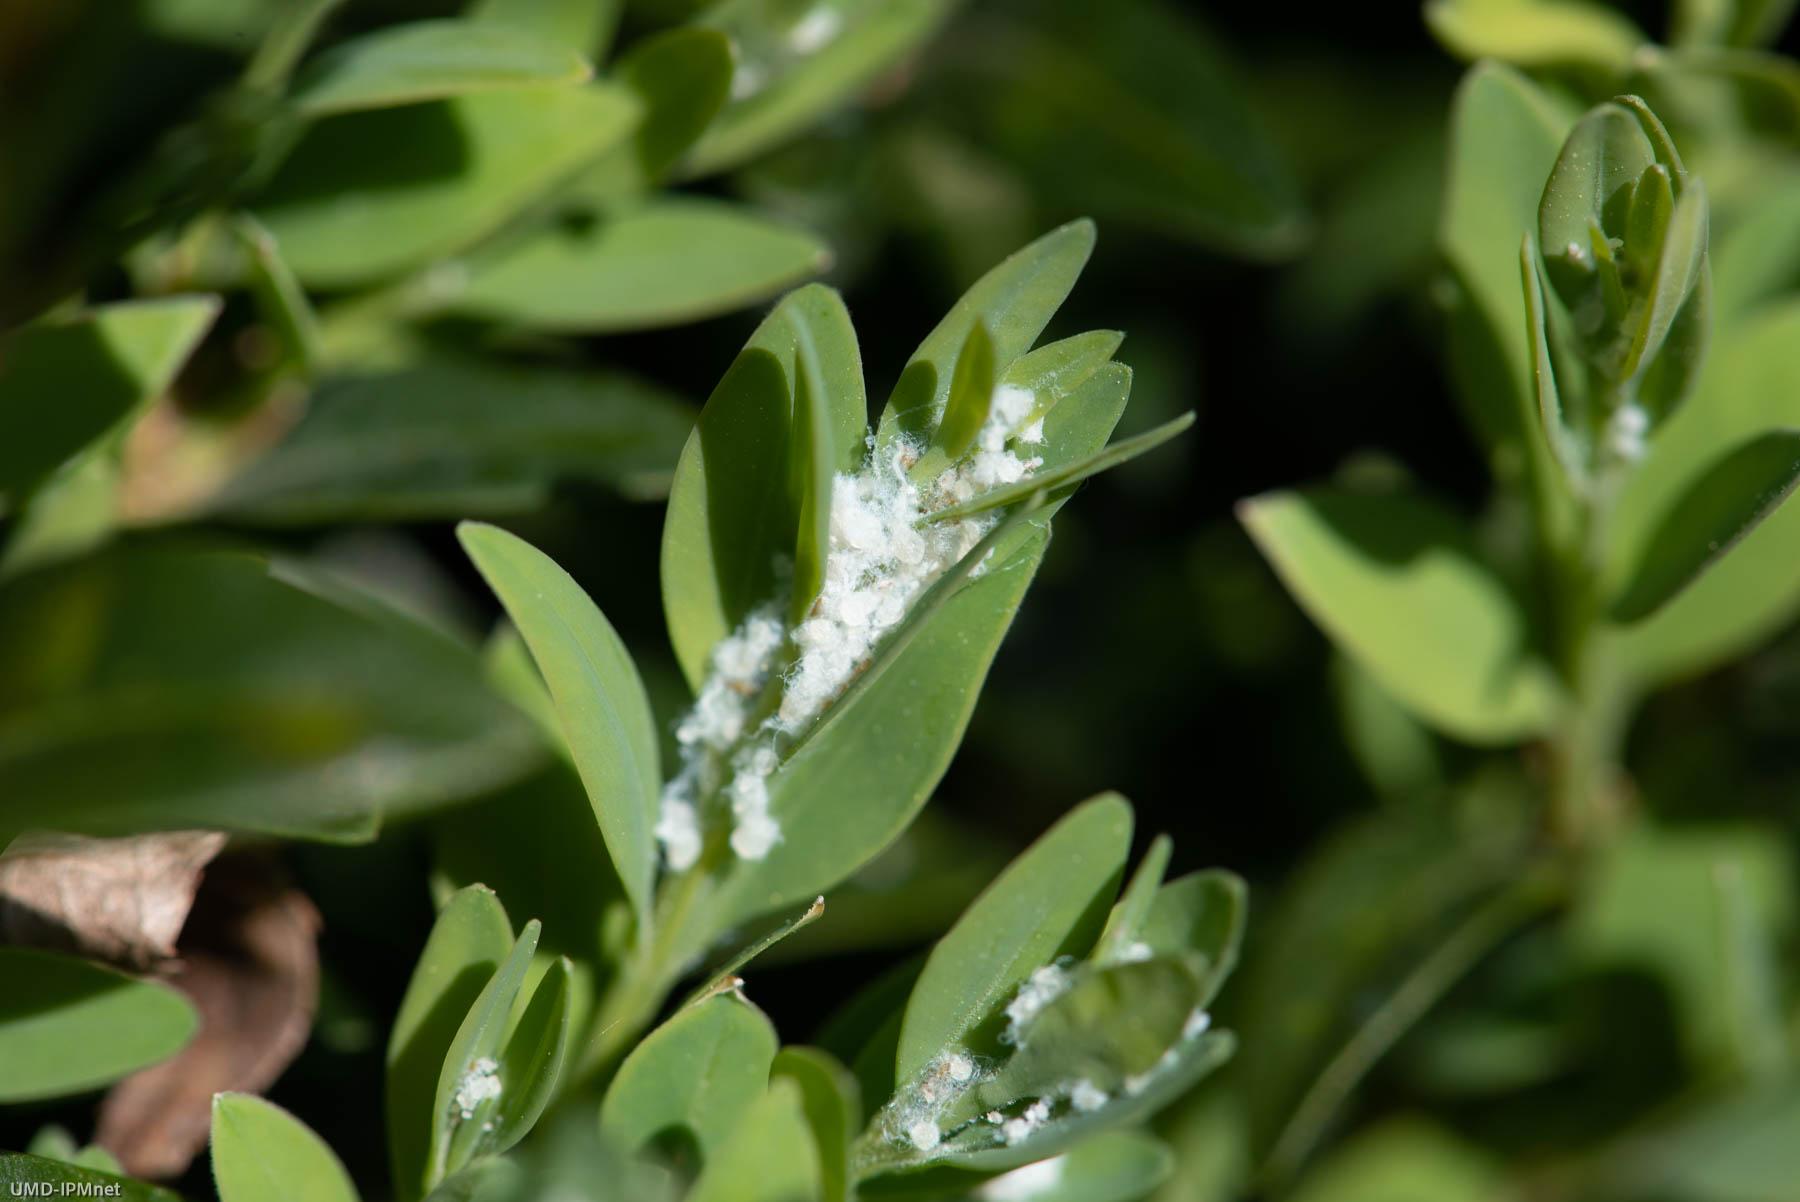 Wax covering boxwood psyllid nymphs in growing tip